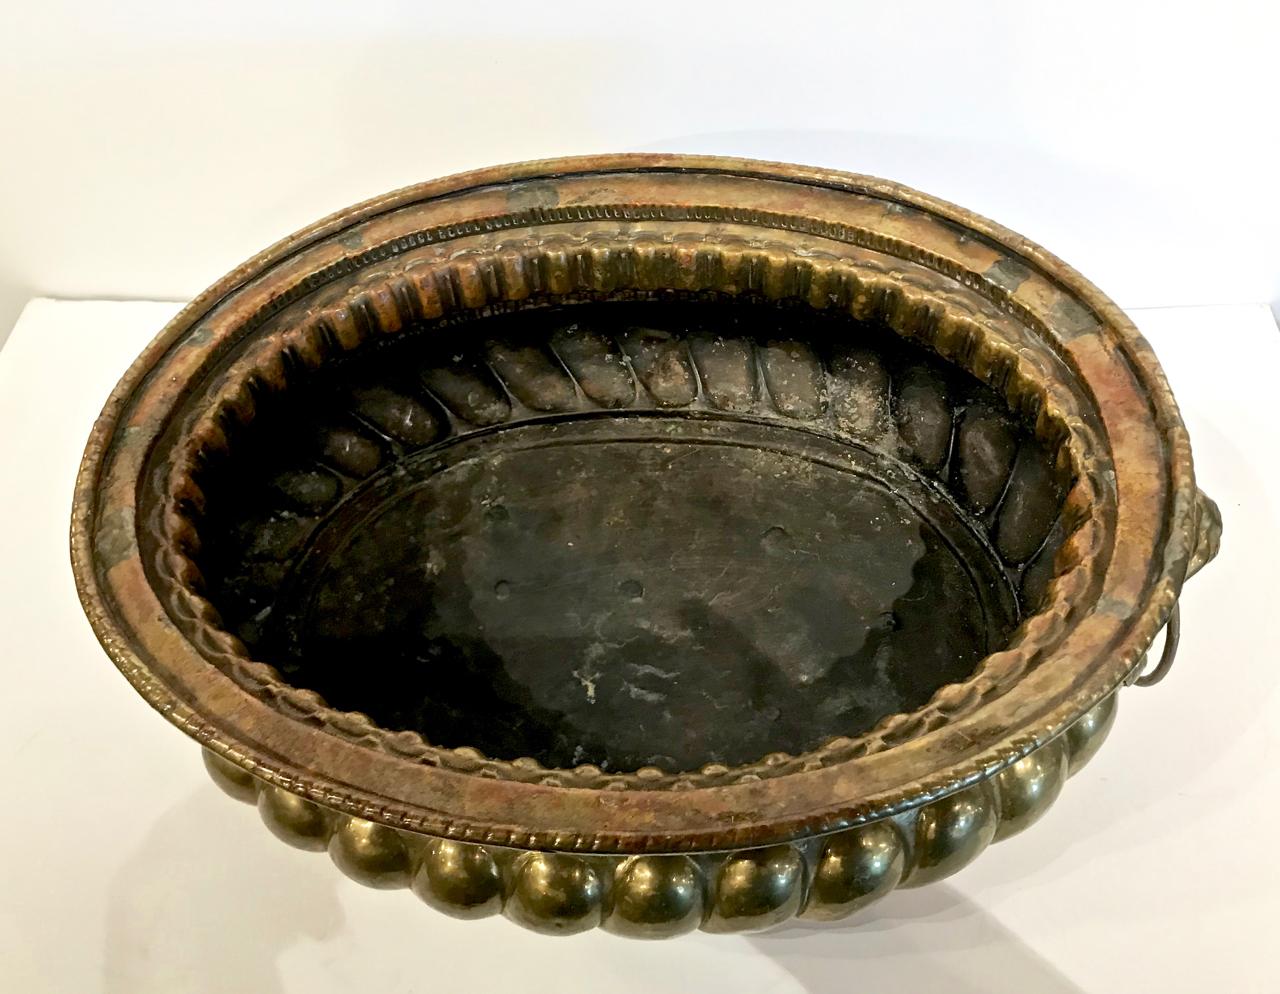 This is a very decorative and detailed 18th/19th century Dutch brass wine cooler/planter or jardinière. The planter is detailed with high relief lion's head end handles and lion paw feet. In addition to functioning as a standout wine cooler, this